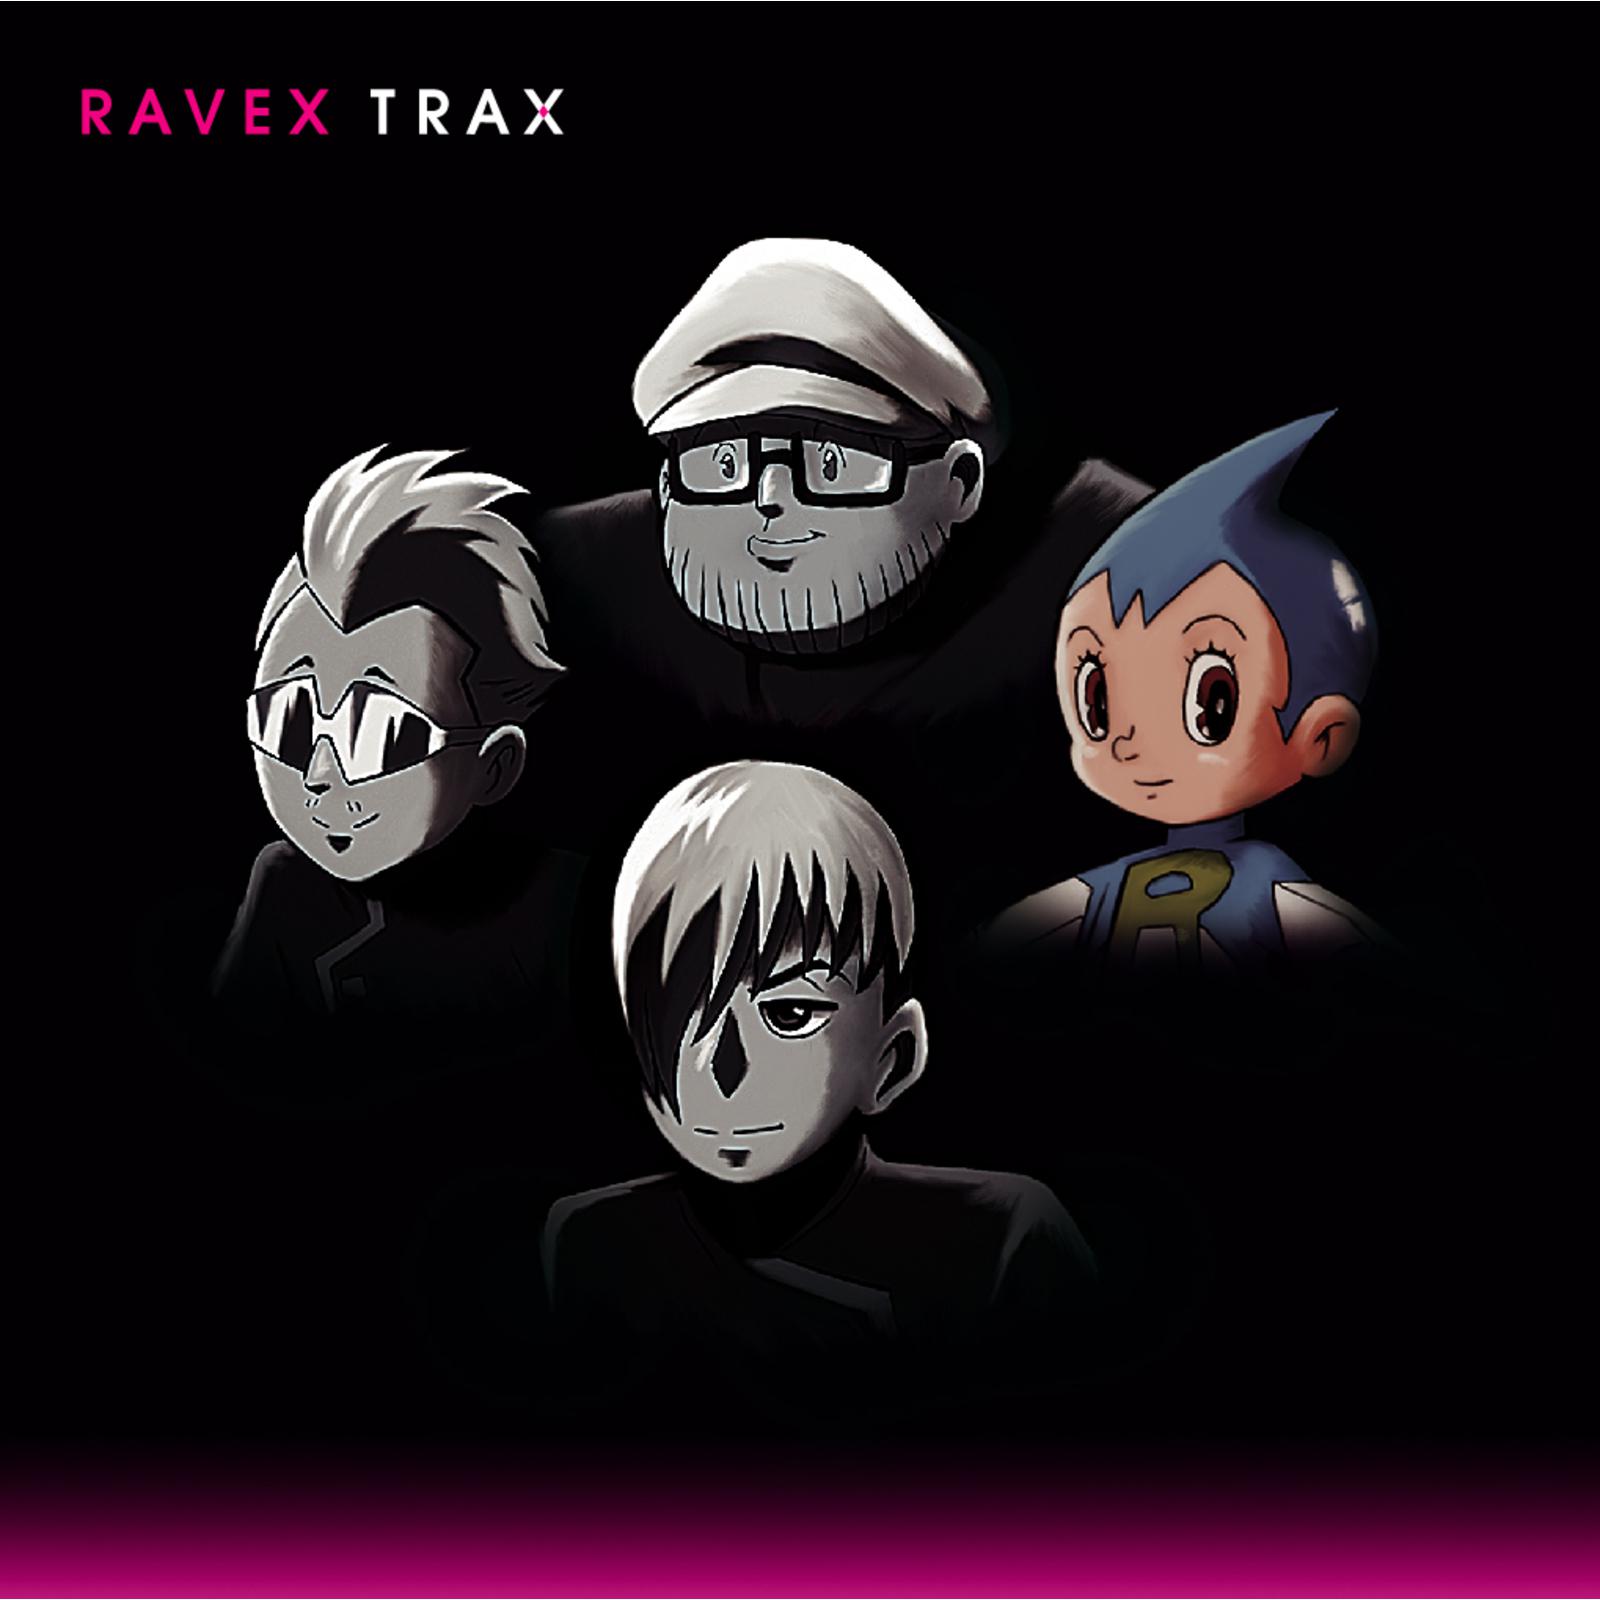 ravex - Just the Two of Us